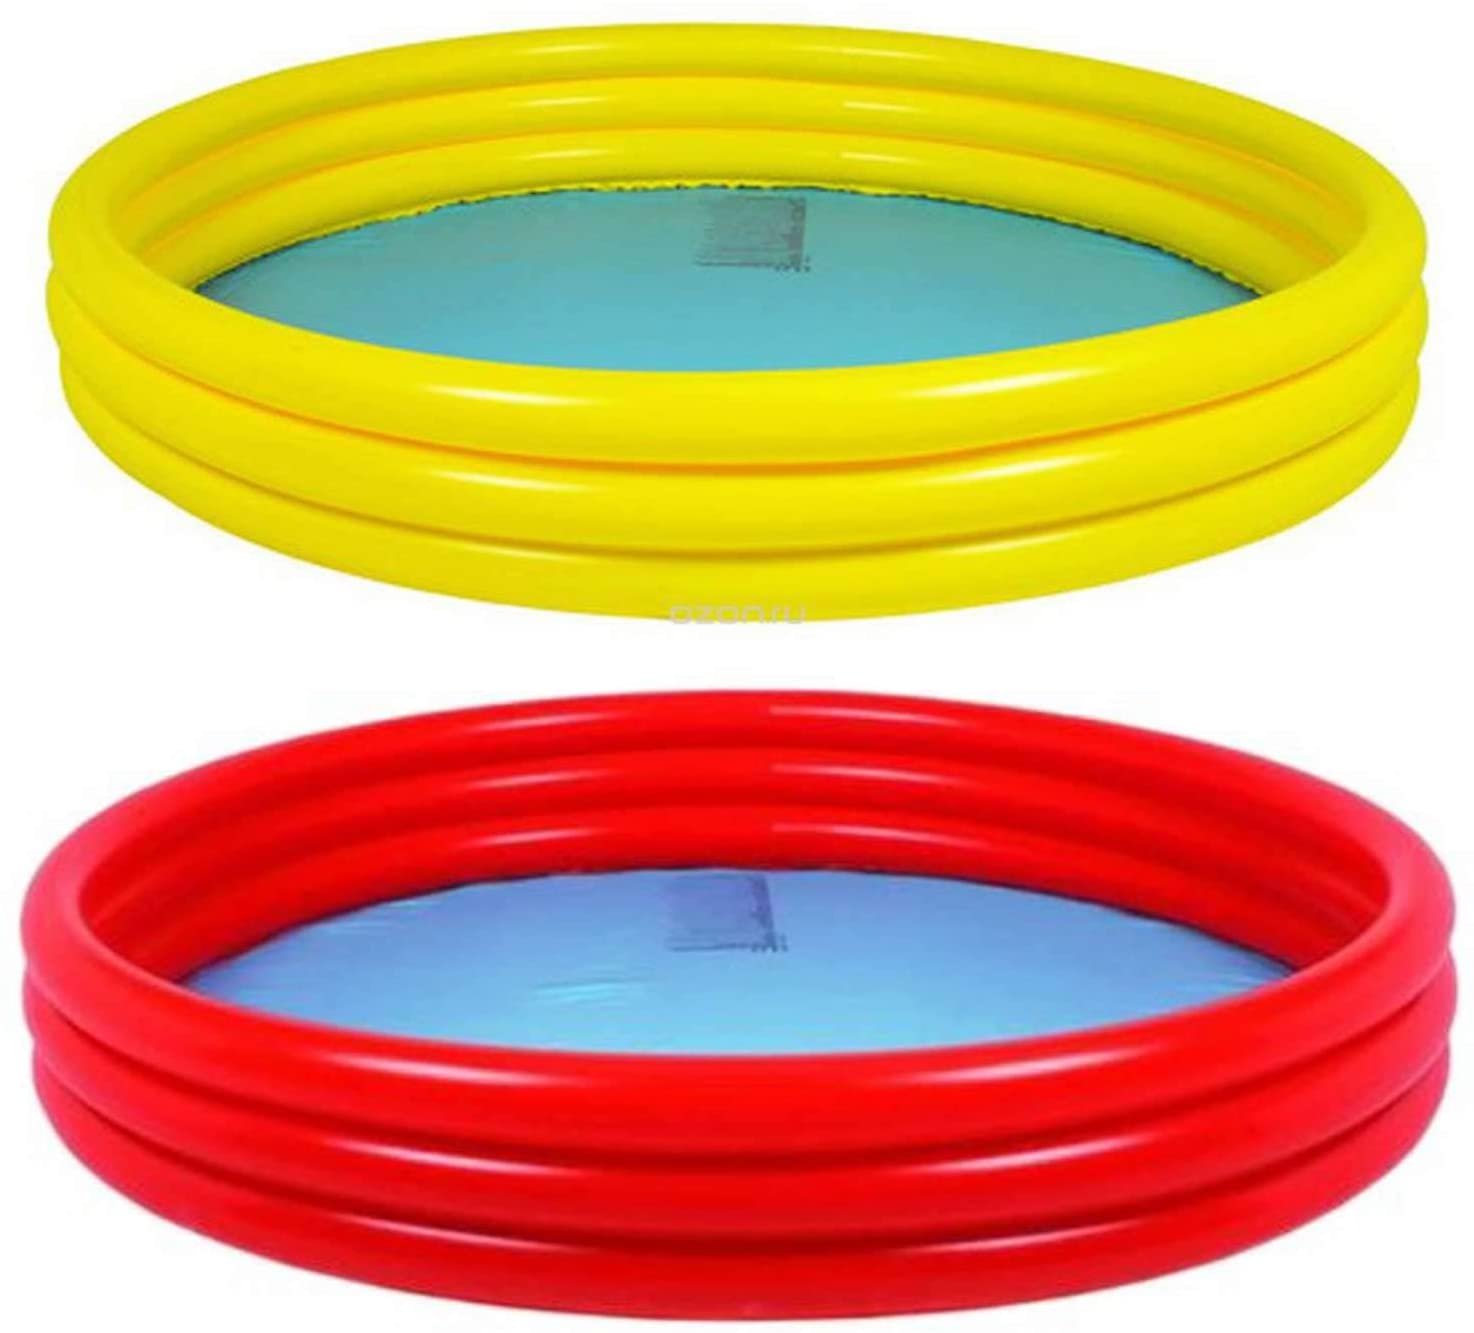 48” KIDS COLOURFUL INFLATABLE 3 RING PADDLING POOL SUMMER OUTDOOR SWIMMING FUN 